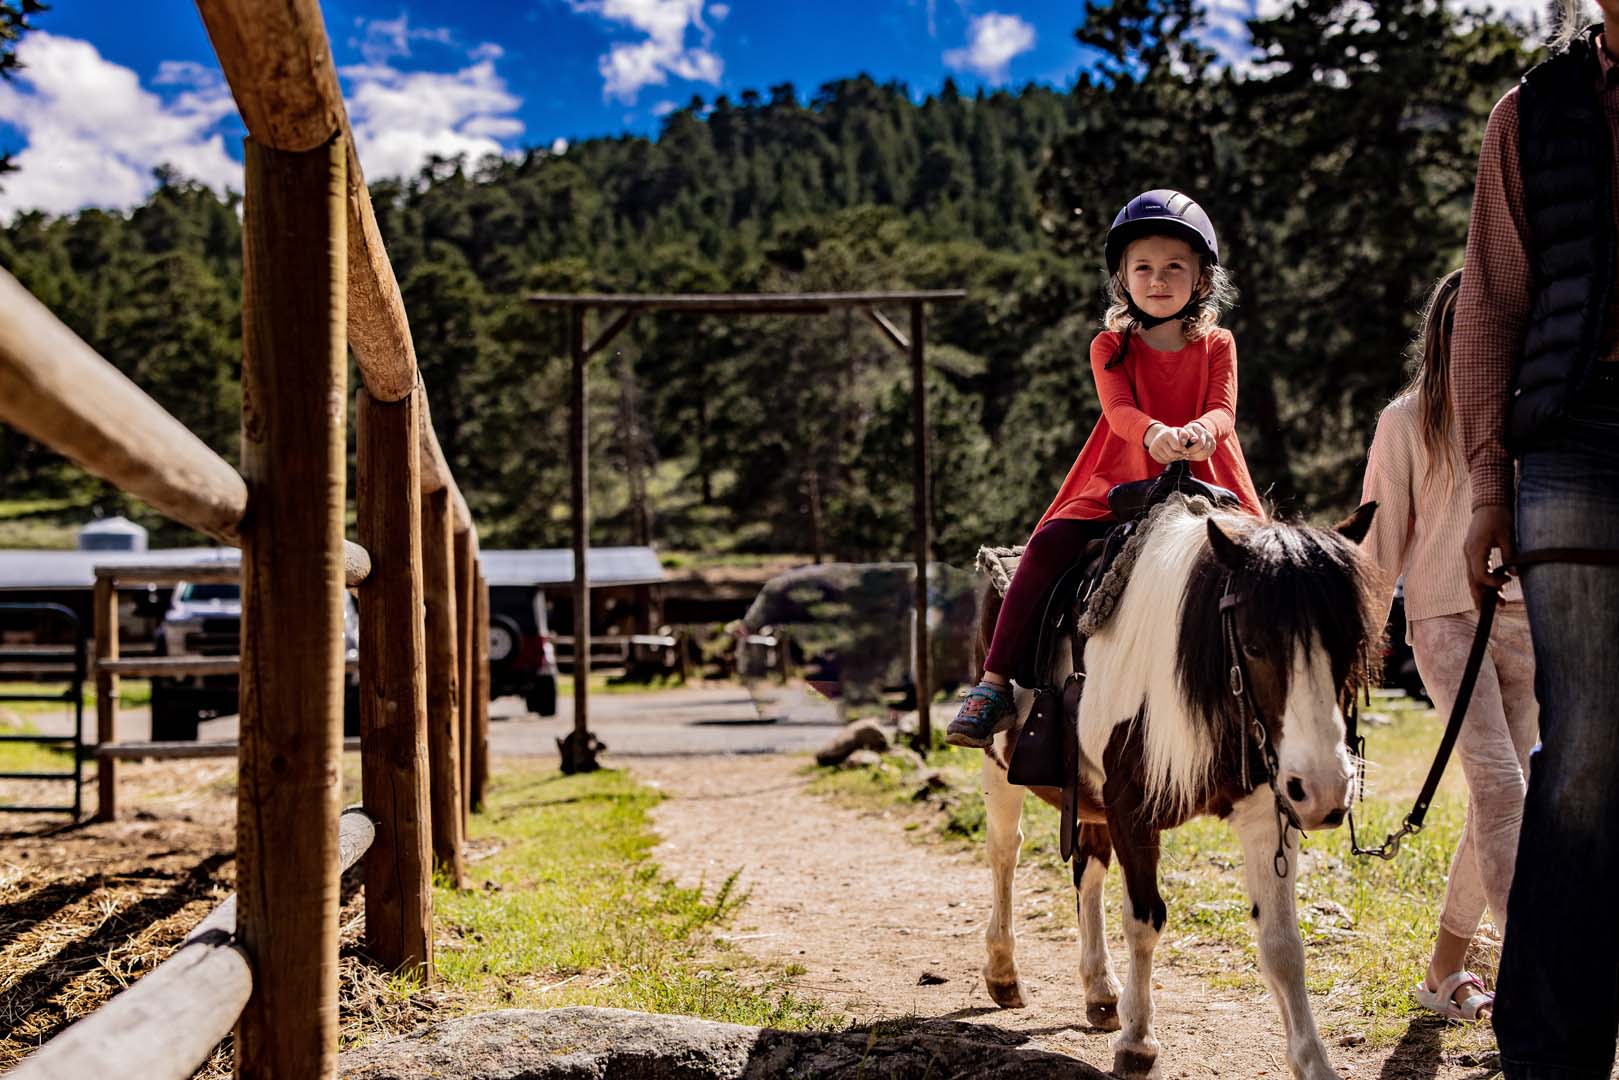 little girl riding a pony